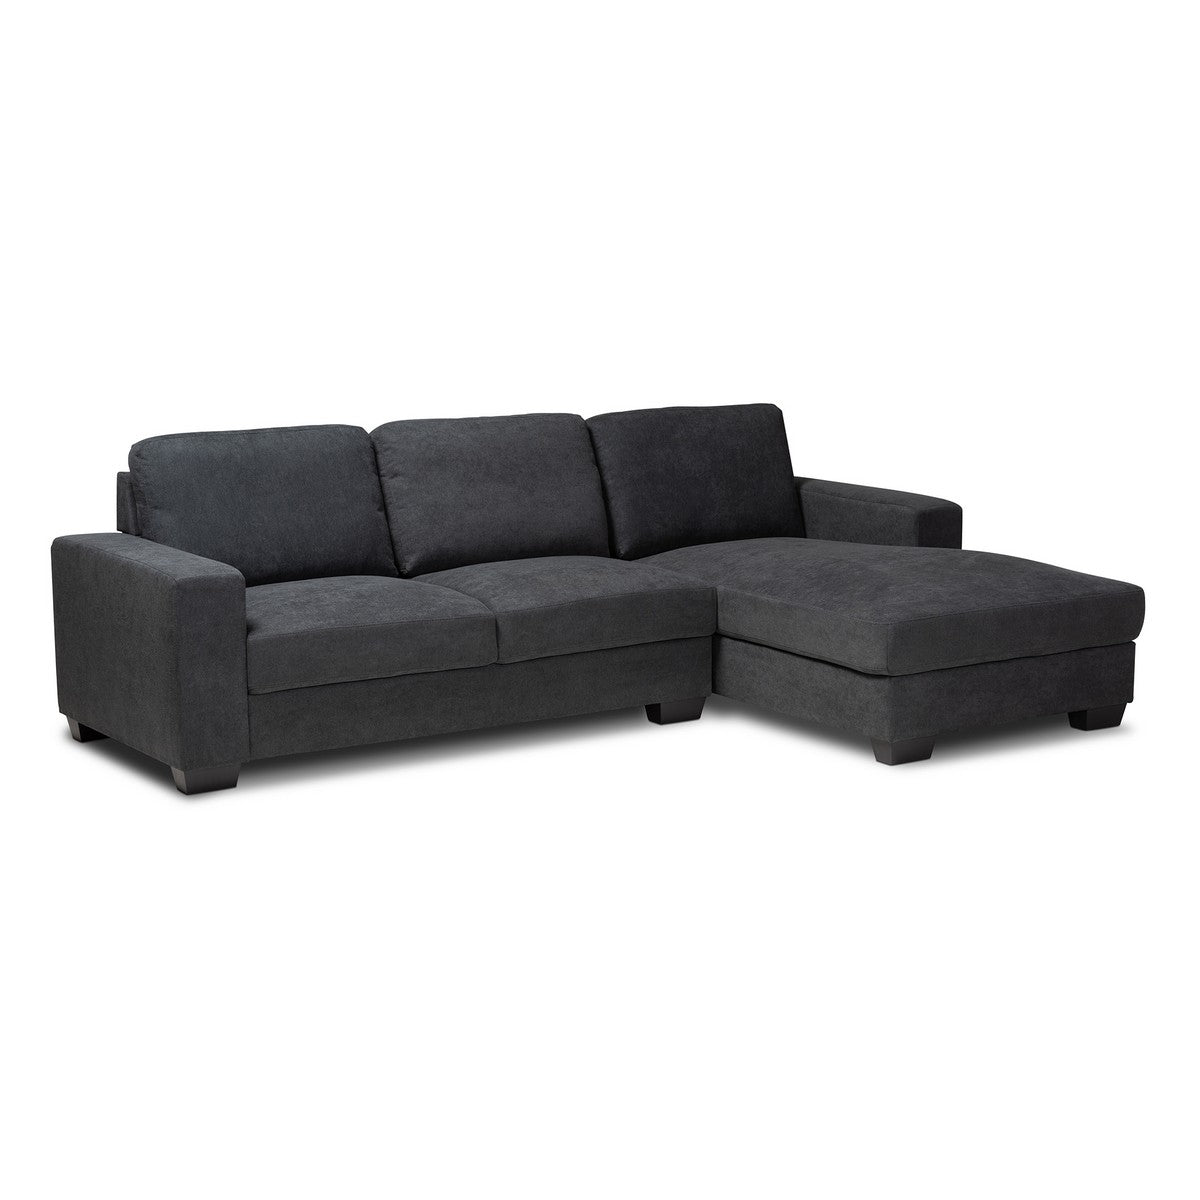 Baxton Studio Nevin Modern and Contemporary Dark Grey Fabric Upholstered Sectional Sofa with Right Facing Chaise Baxton Studio-sectionals-Minimal And Modern - 1